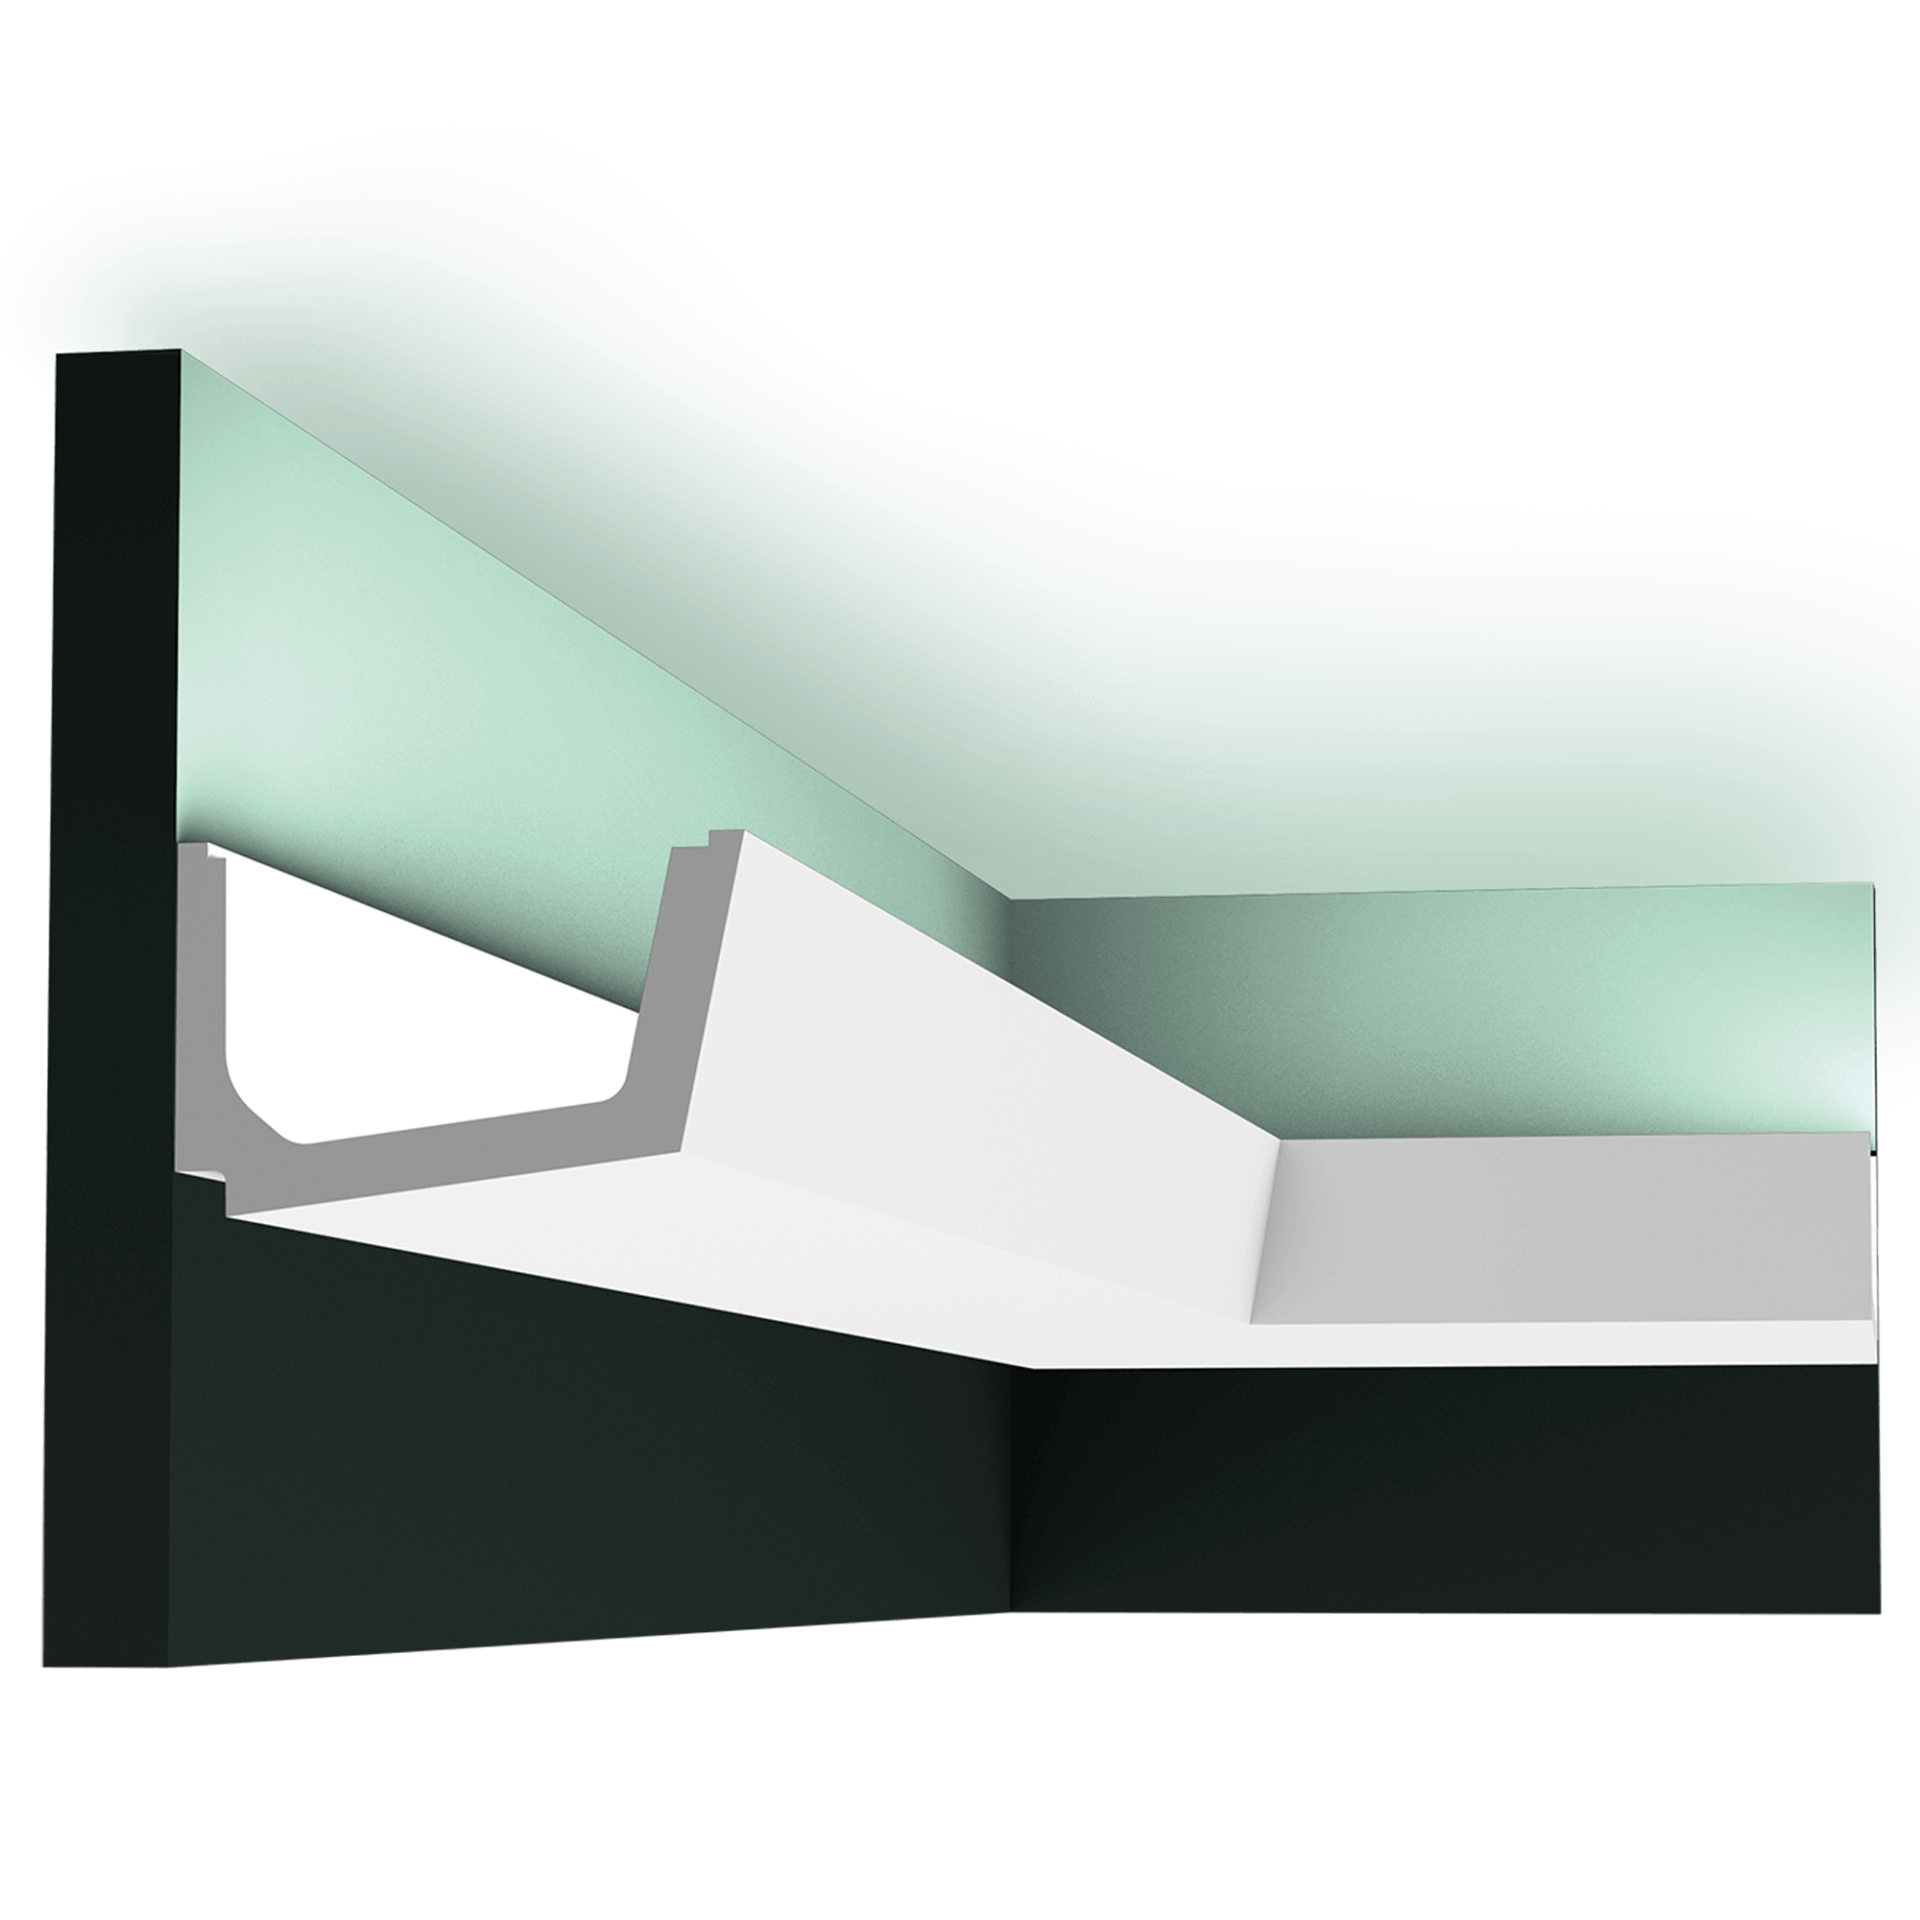 c357 uplighter e852 This profile integrates indirect lighting in your interior in a contemporary and minimalist fashion. Designed by Jacques Vergracht. Installation remark: It is necessary to screw this profile on the wall.